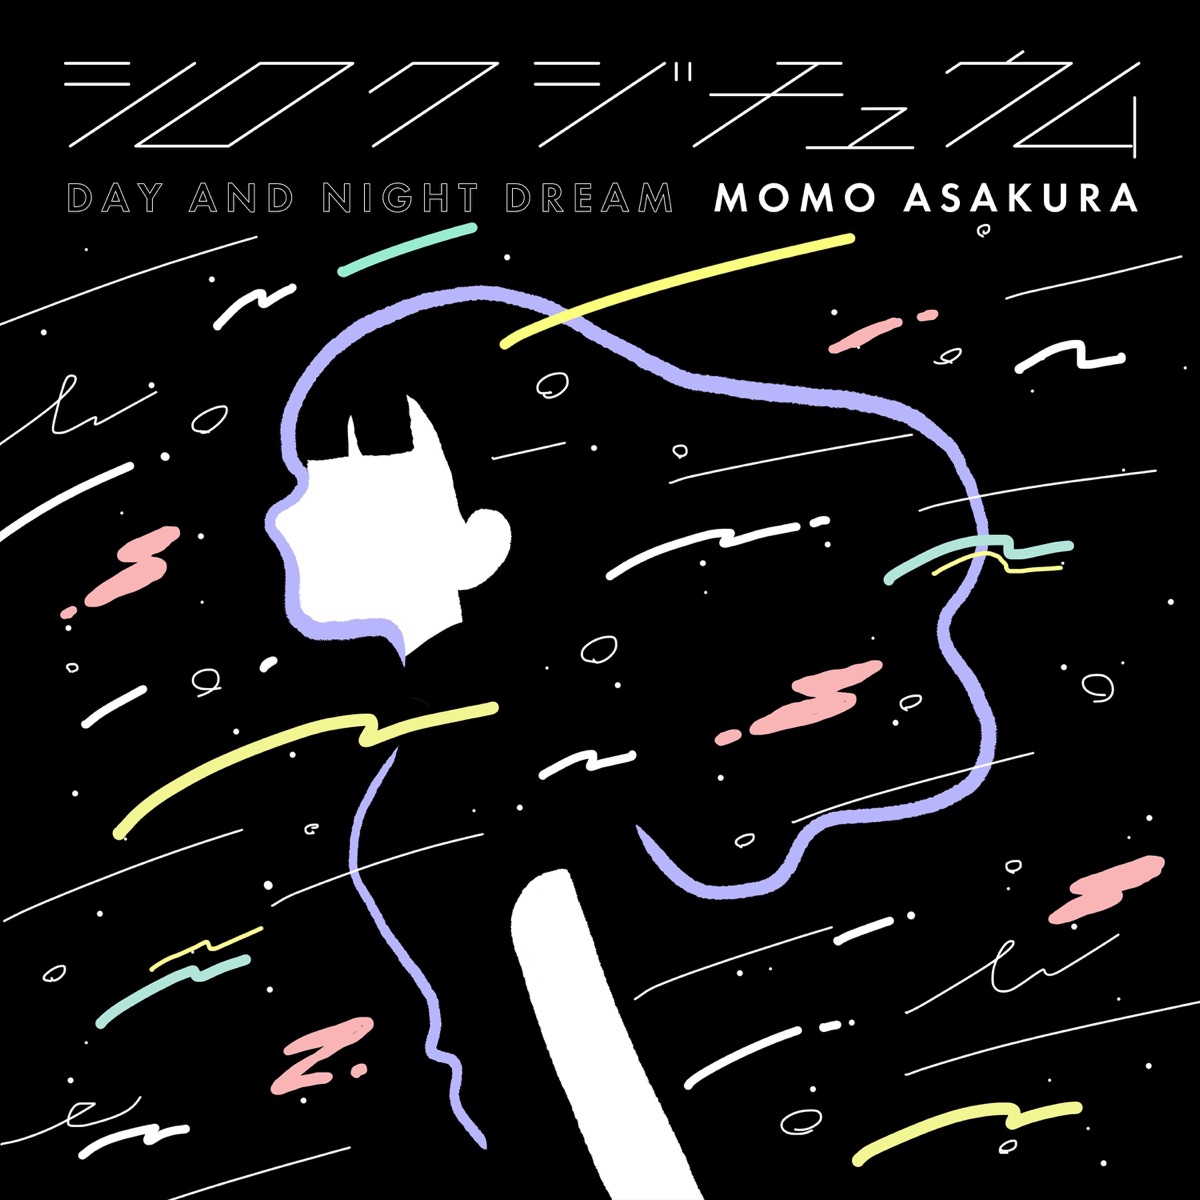 Cover art for『Momo Asakura - Day and Night Dream』from the release『Day and Night Dream』